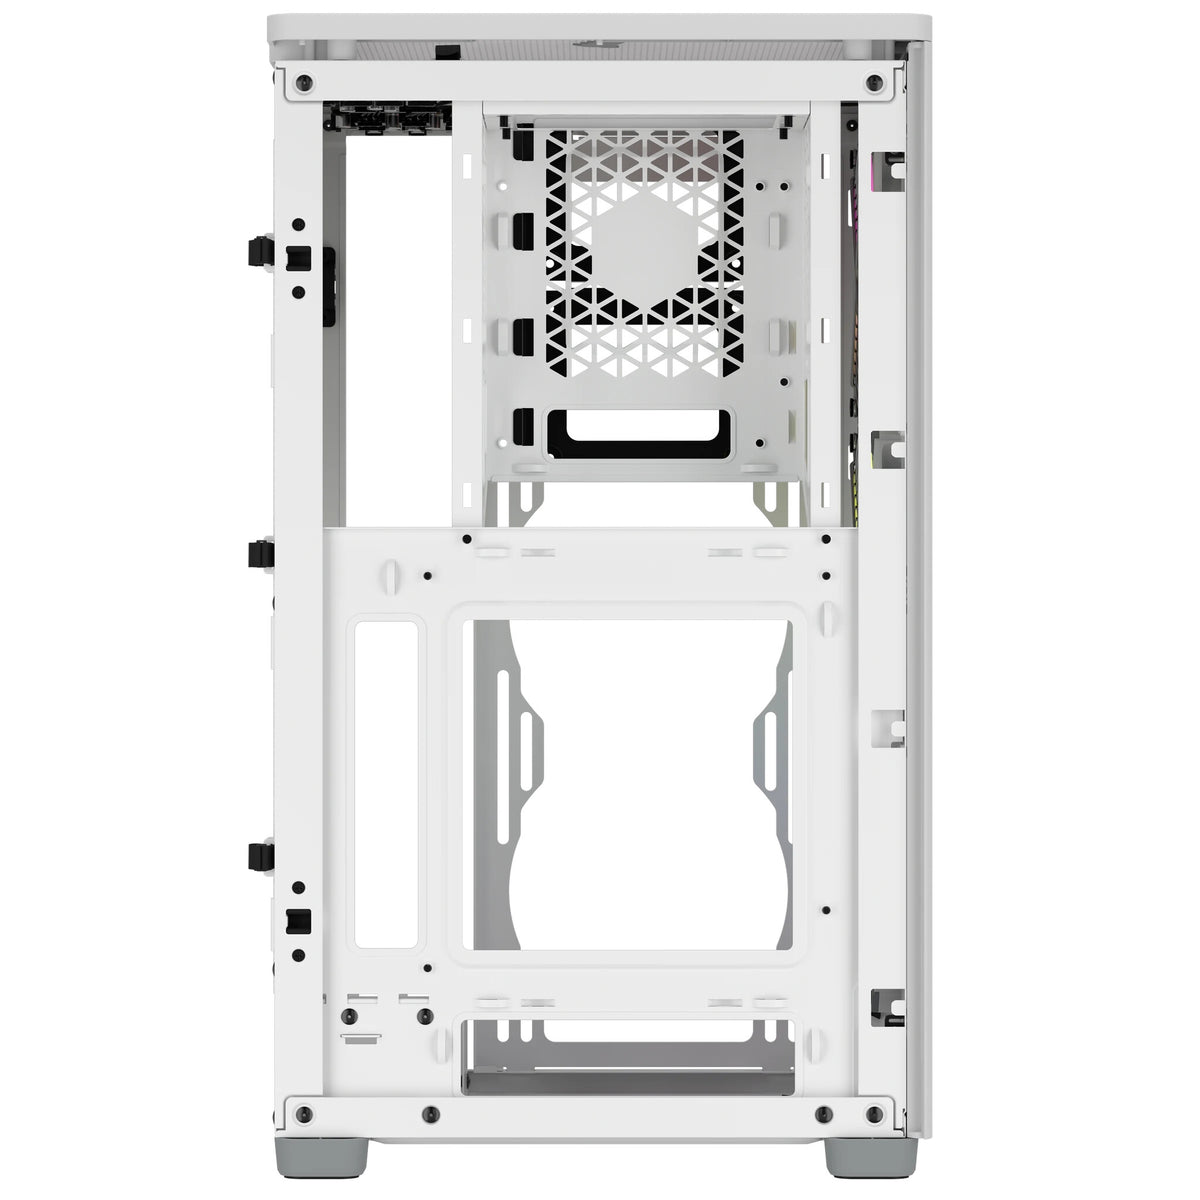 Corsair 2000D RGB Small Form Factor Case in White